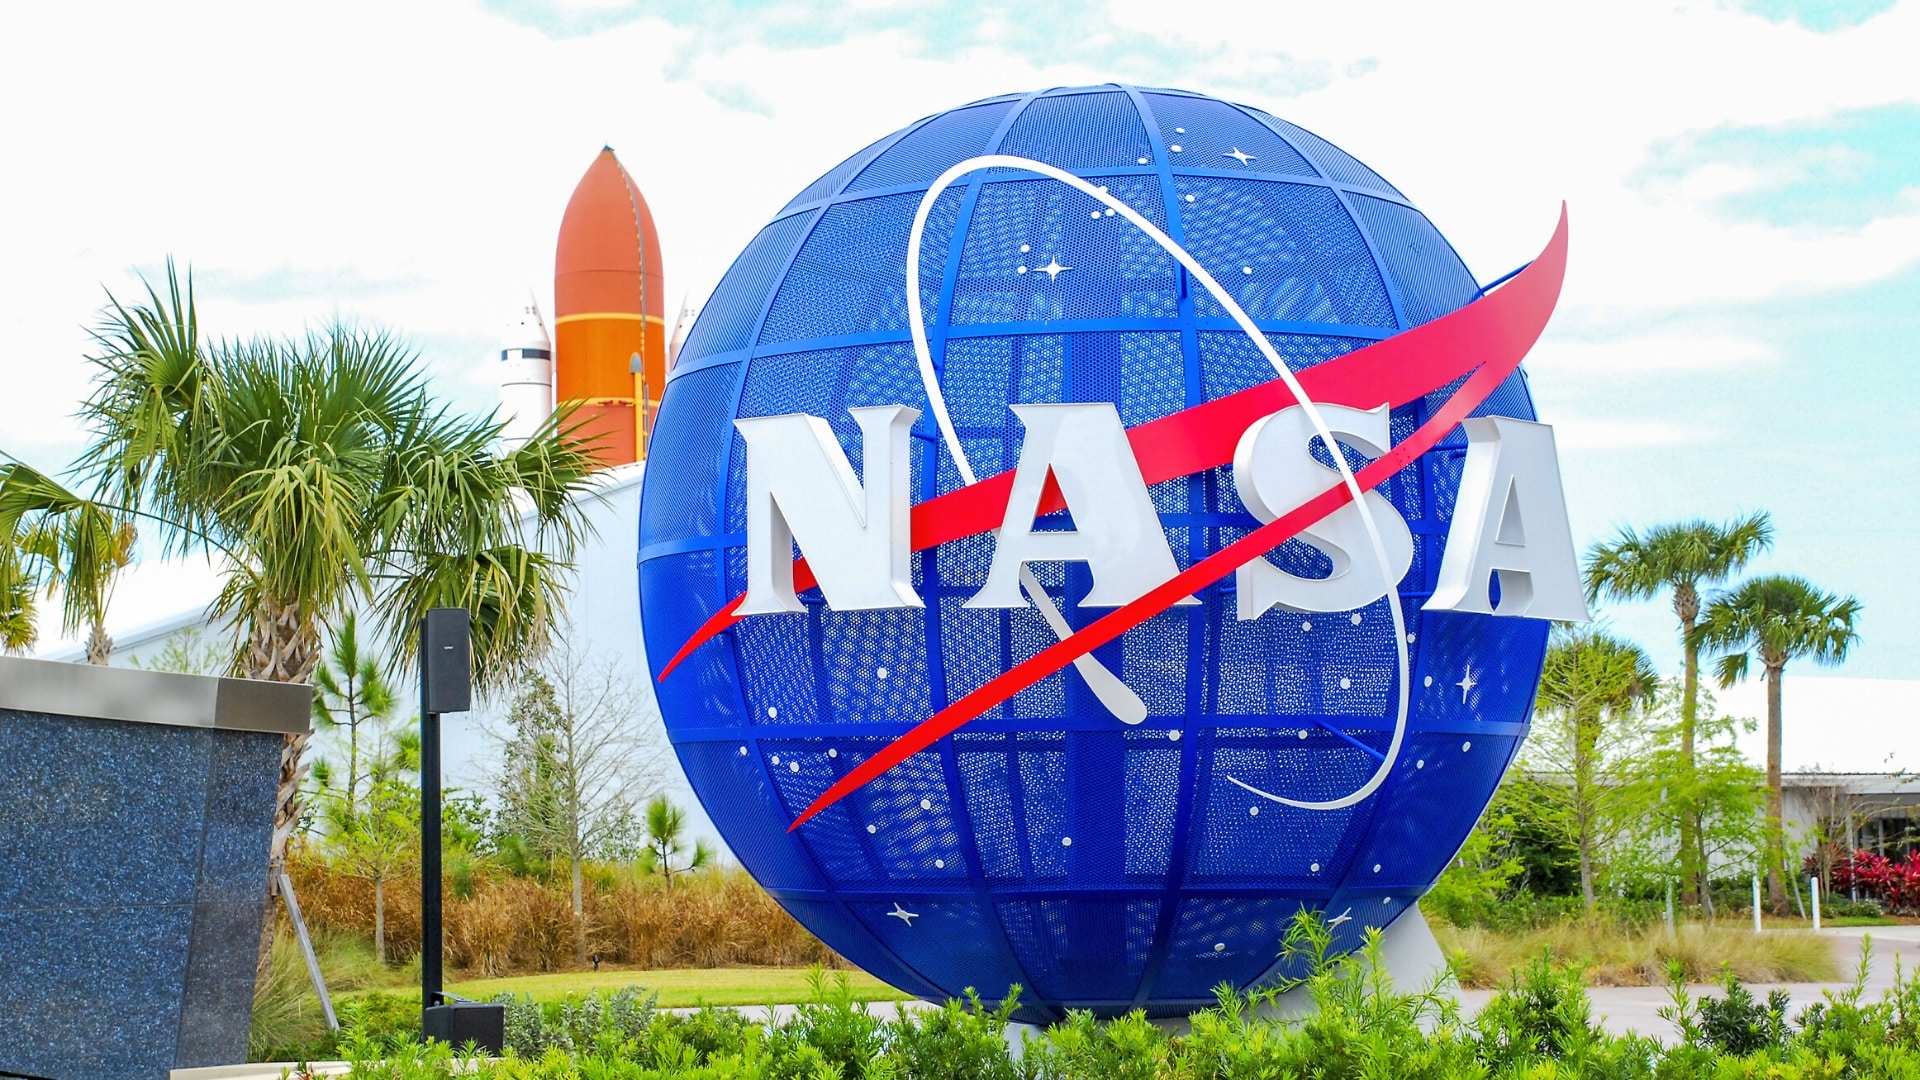 Kennedy Space Center Tour & Airboat Ride near Orlando